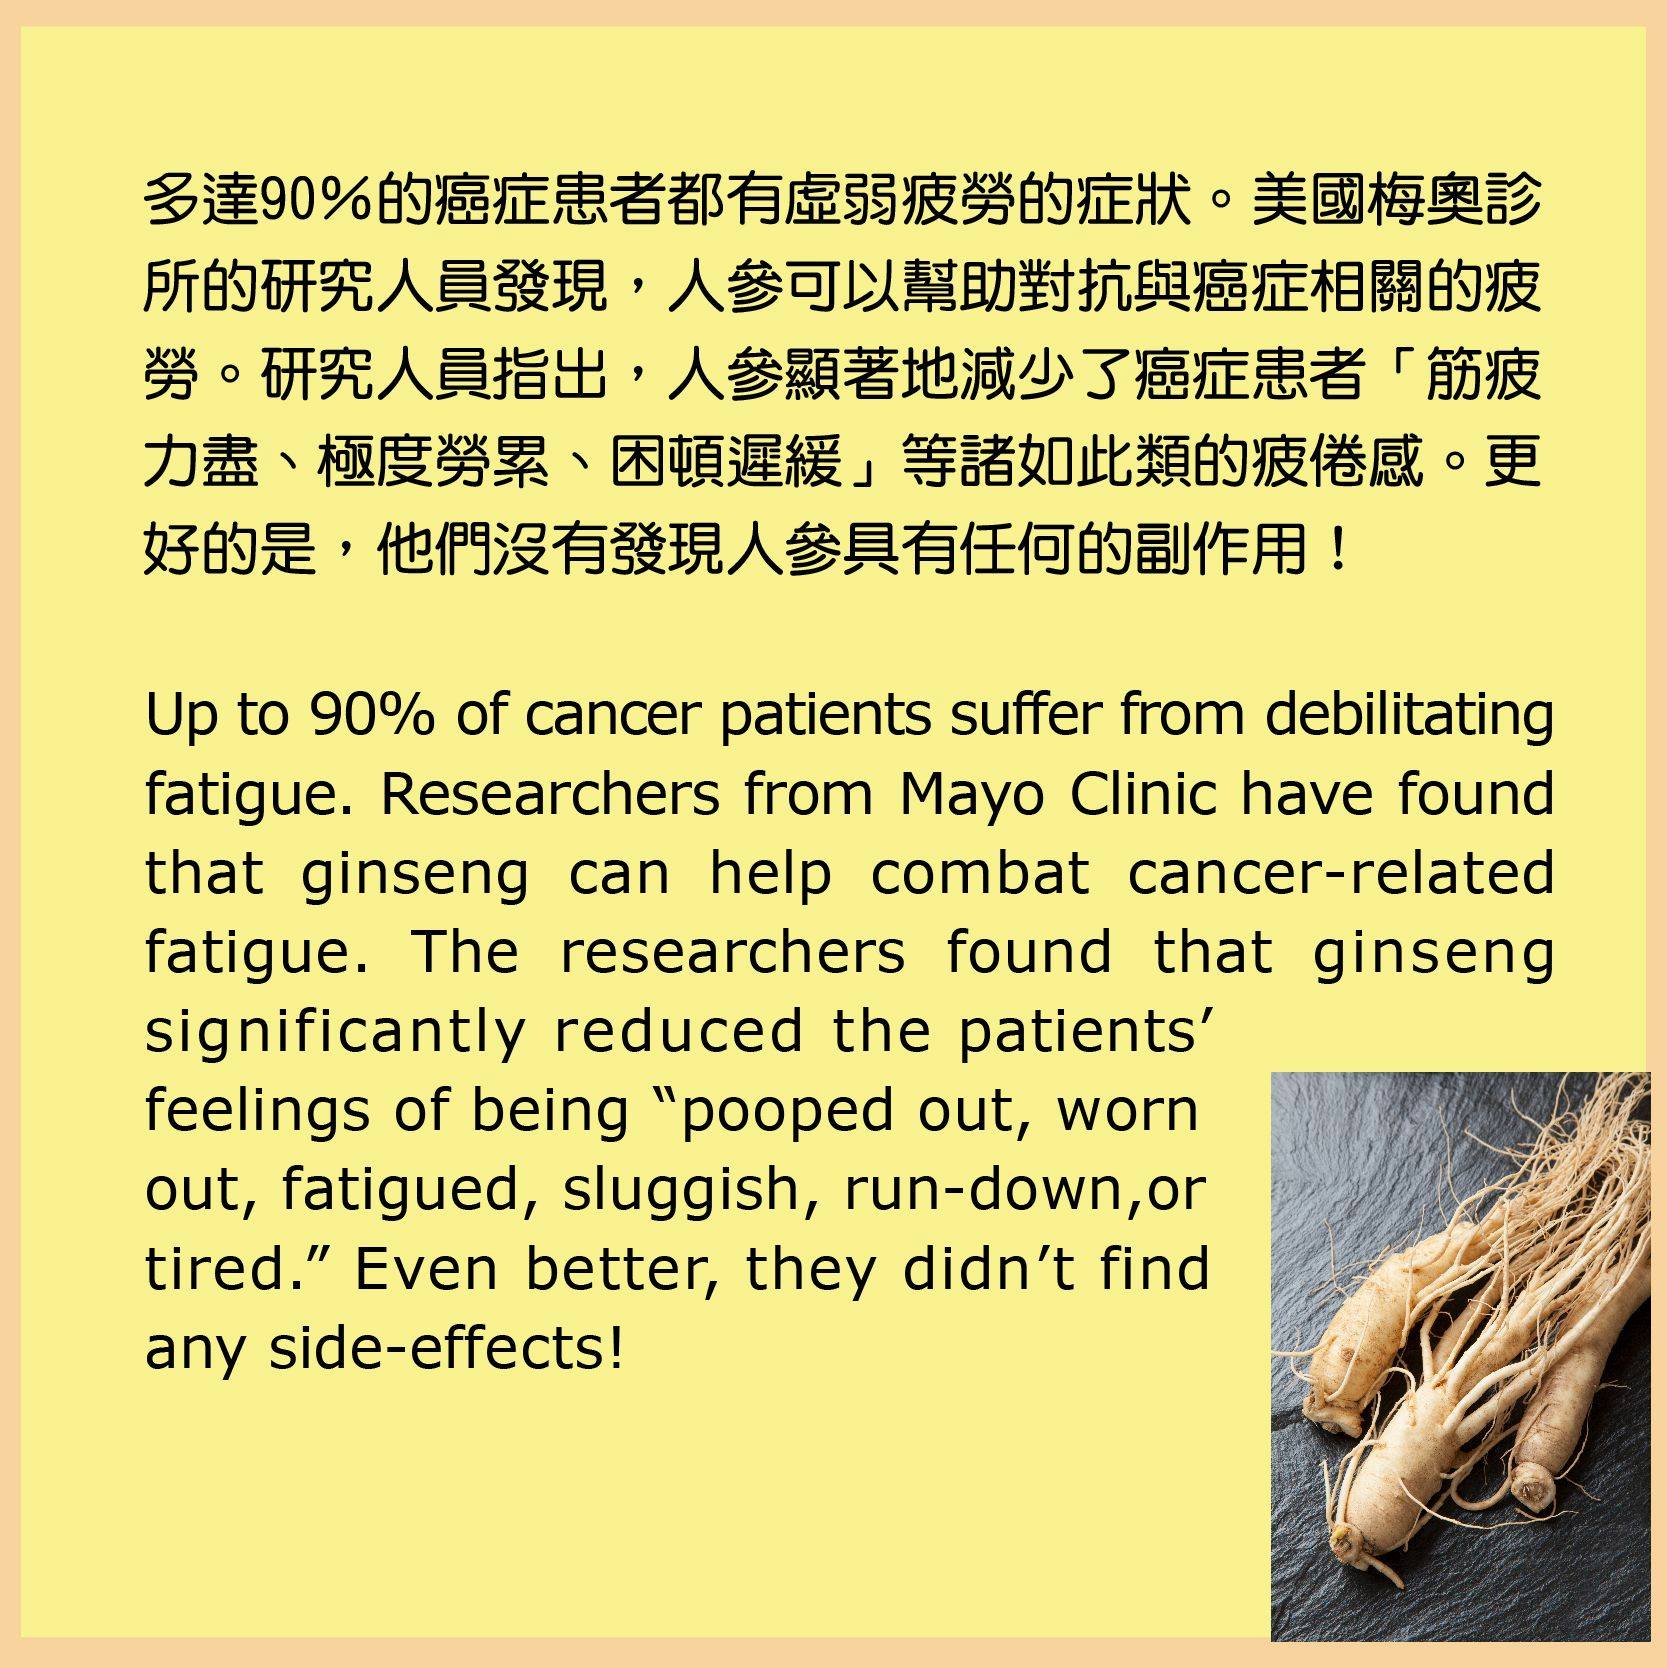 Knowledge - Ginseng